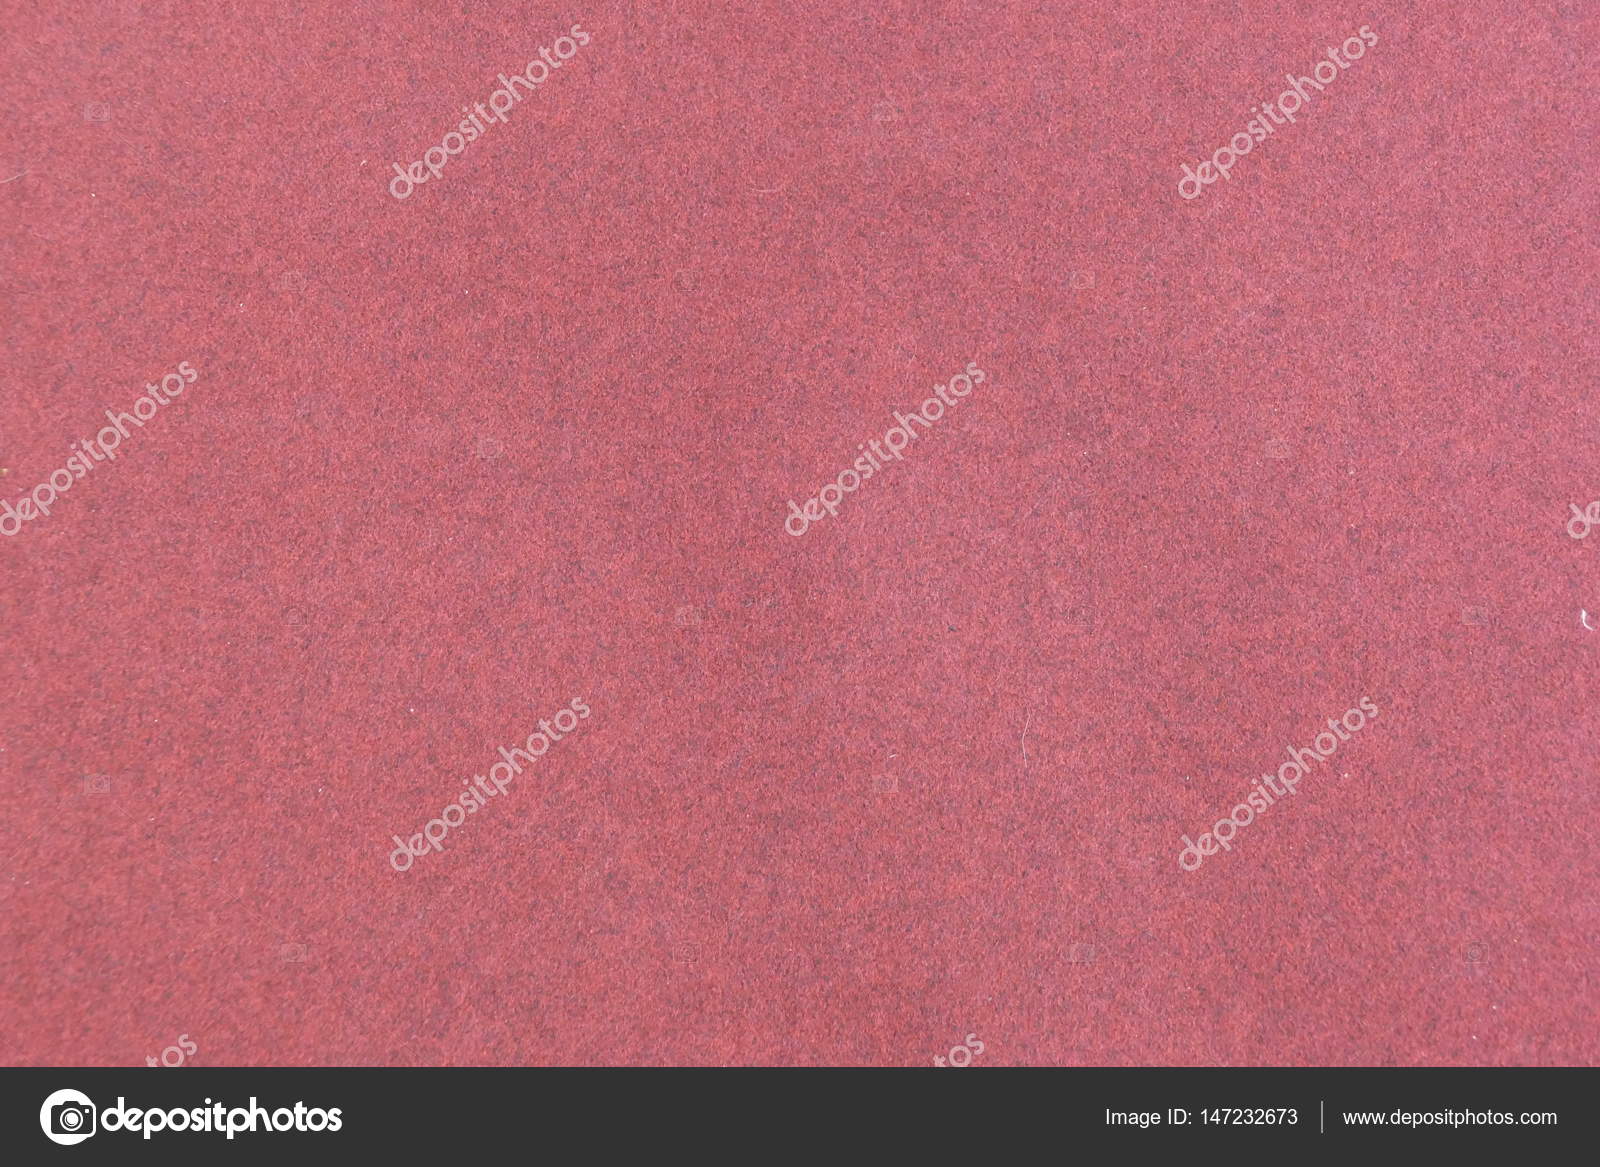 Red Carpet Seamless Texture Simple Red Carpet Seamless Texture Stock Photo C Luciezr 147232673 - roblox red carpet texture